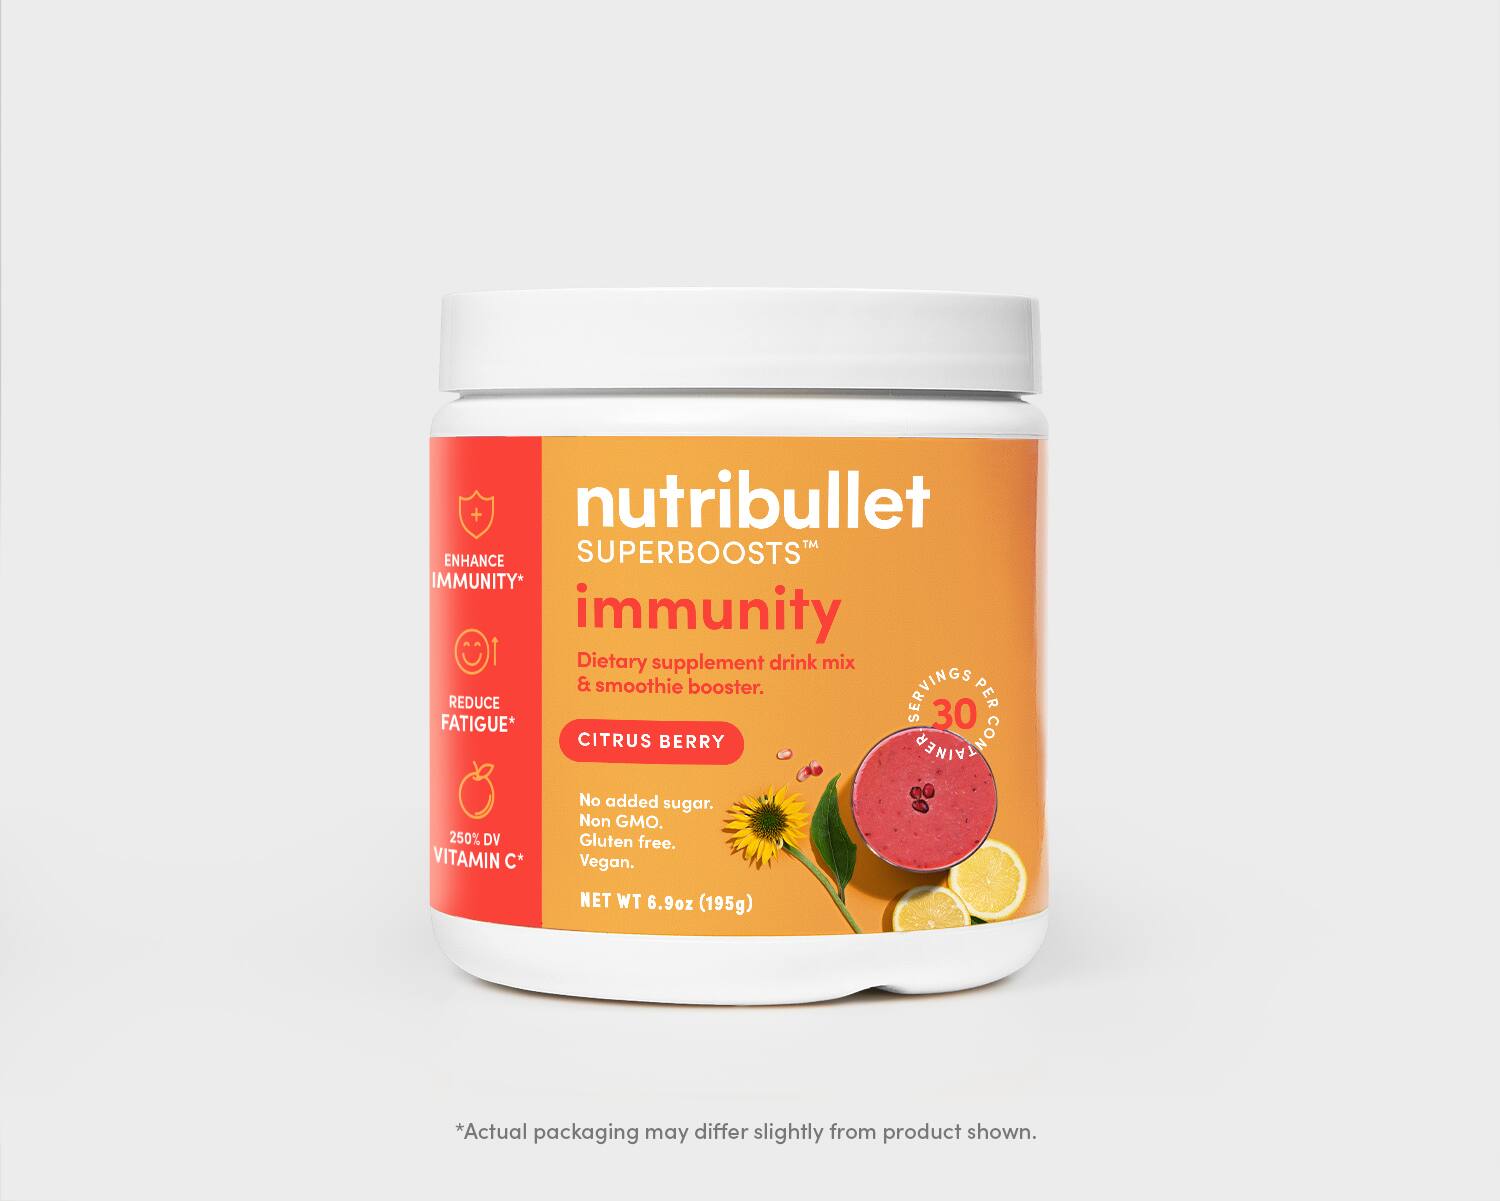 Product preview 1 of 3. Thumbnail nutribullet Immune Defense orange 30 serving tub with fruits and smoothies shown